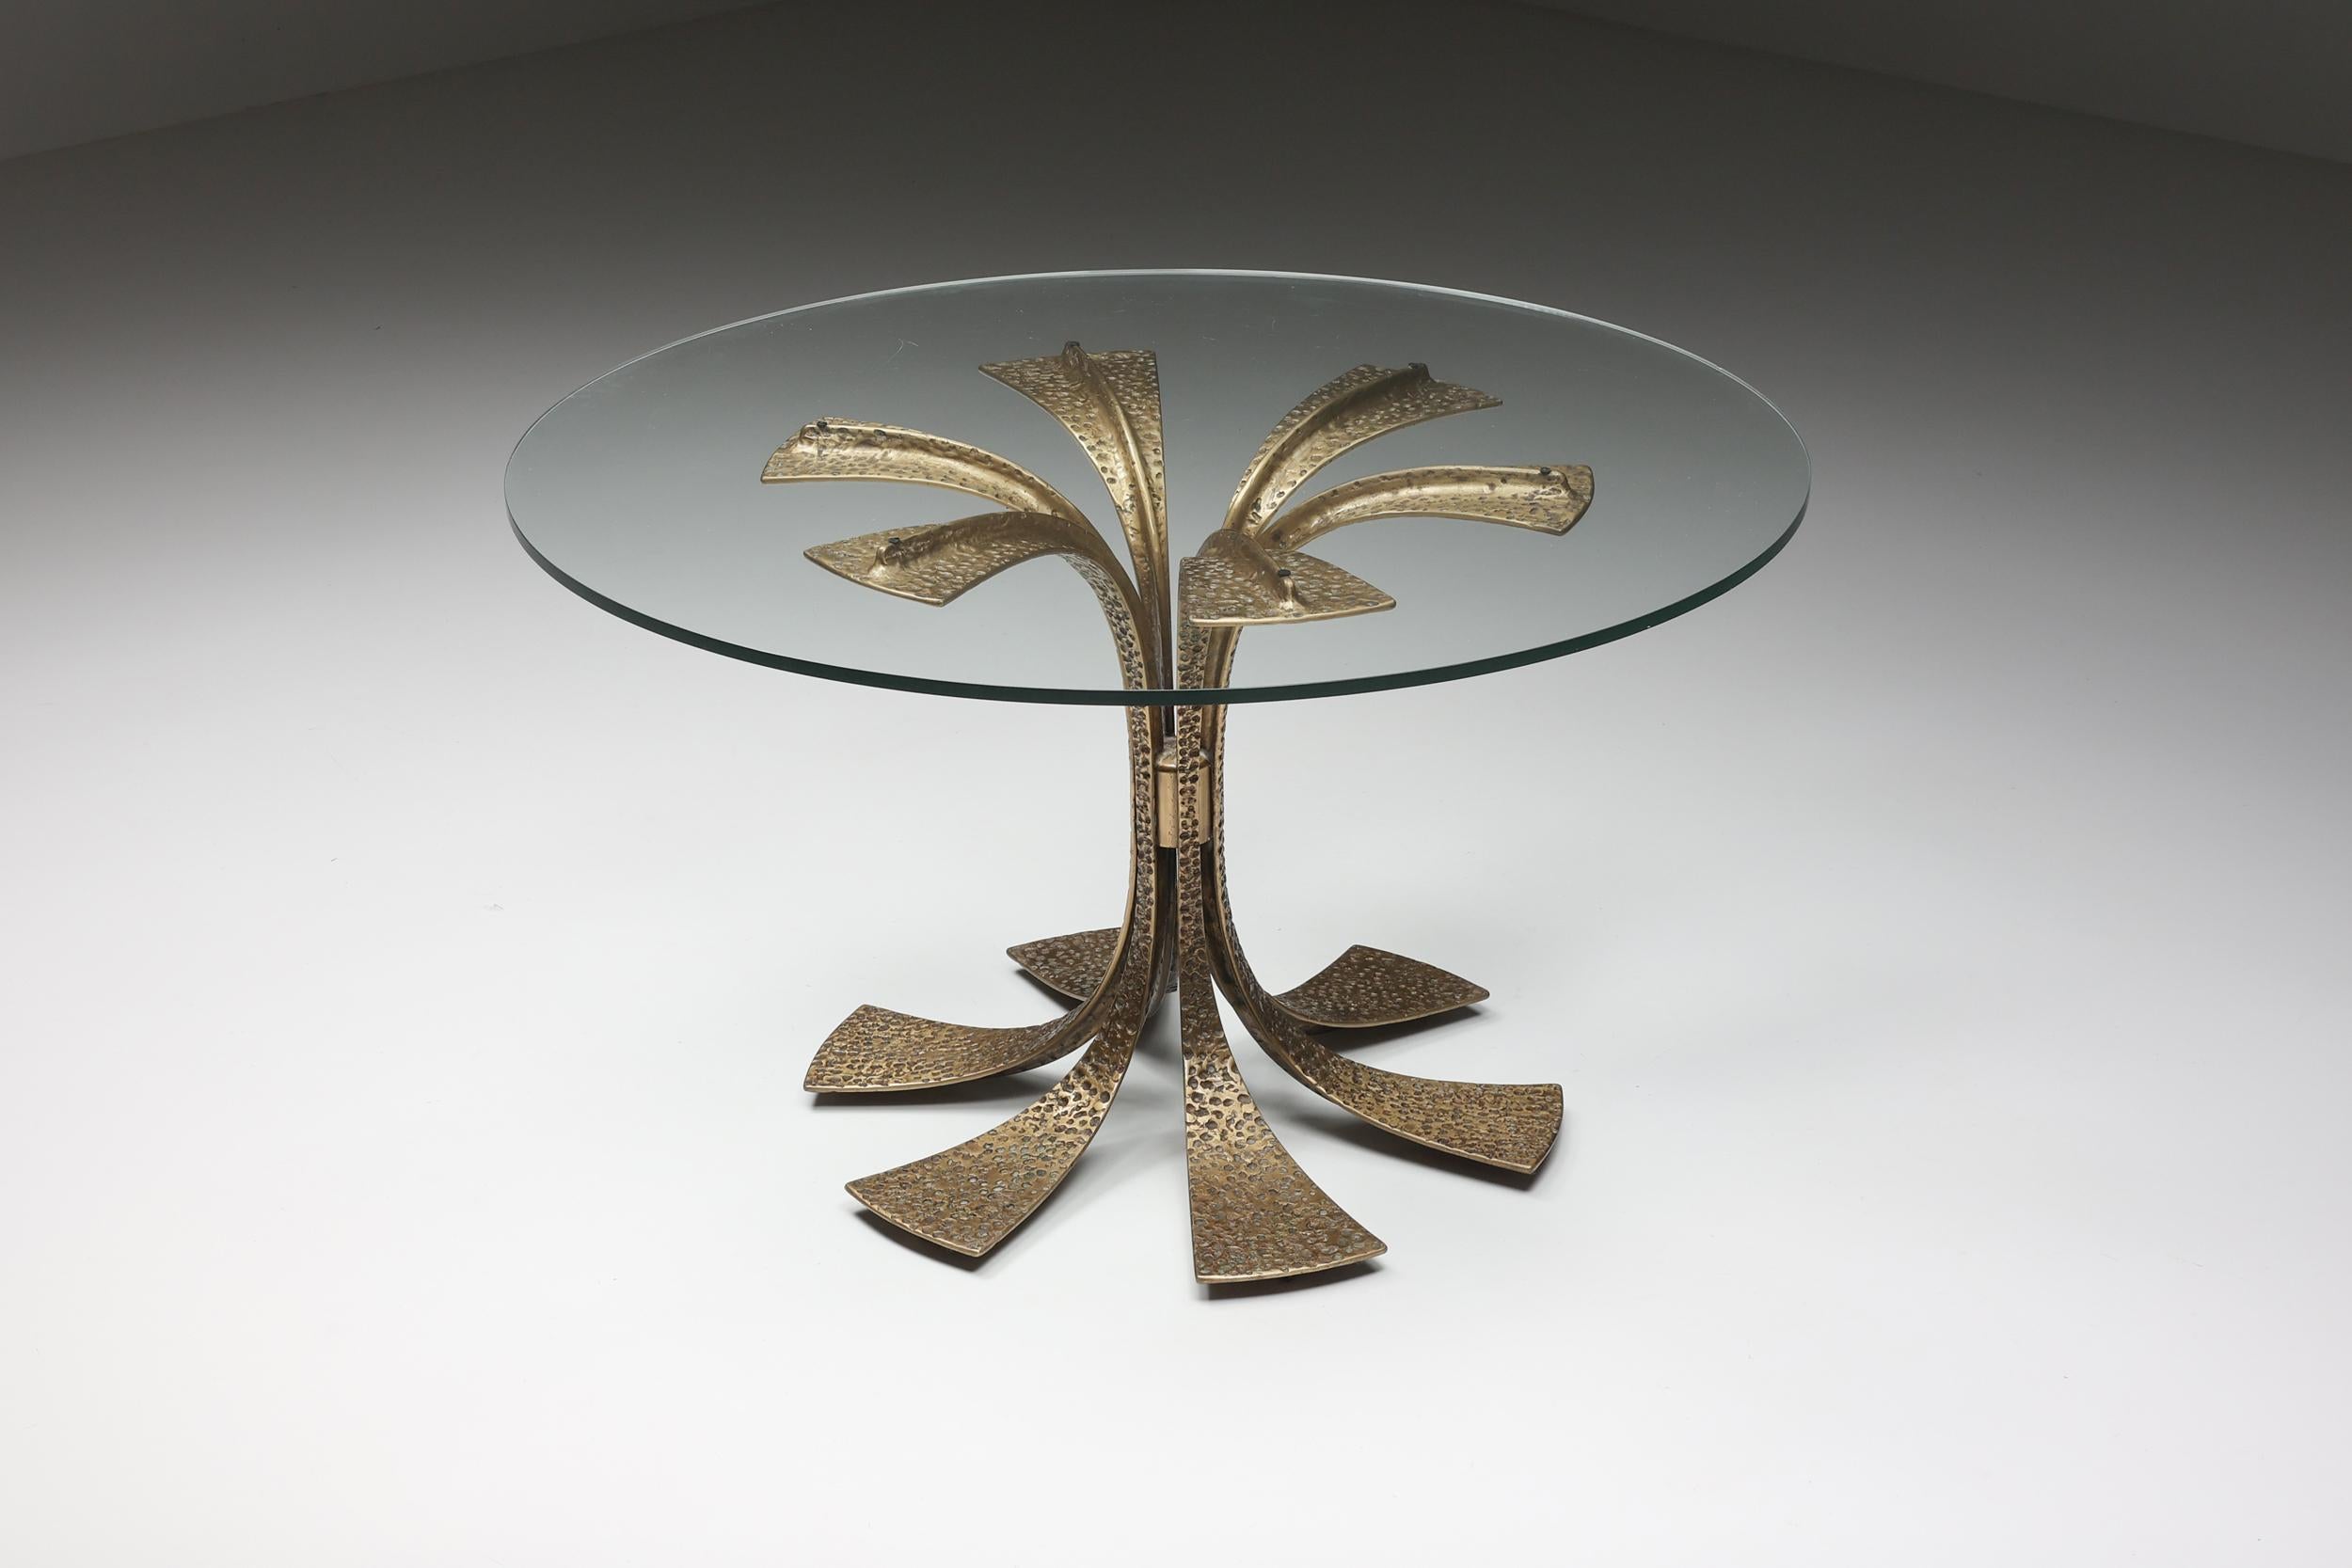 Italian Luciano Frigerio Brass Cast Round Dining Table, Hollywood Regency, Glass, 1980's